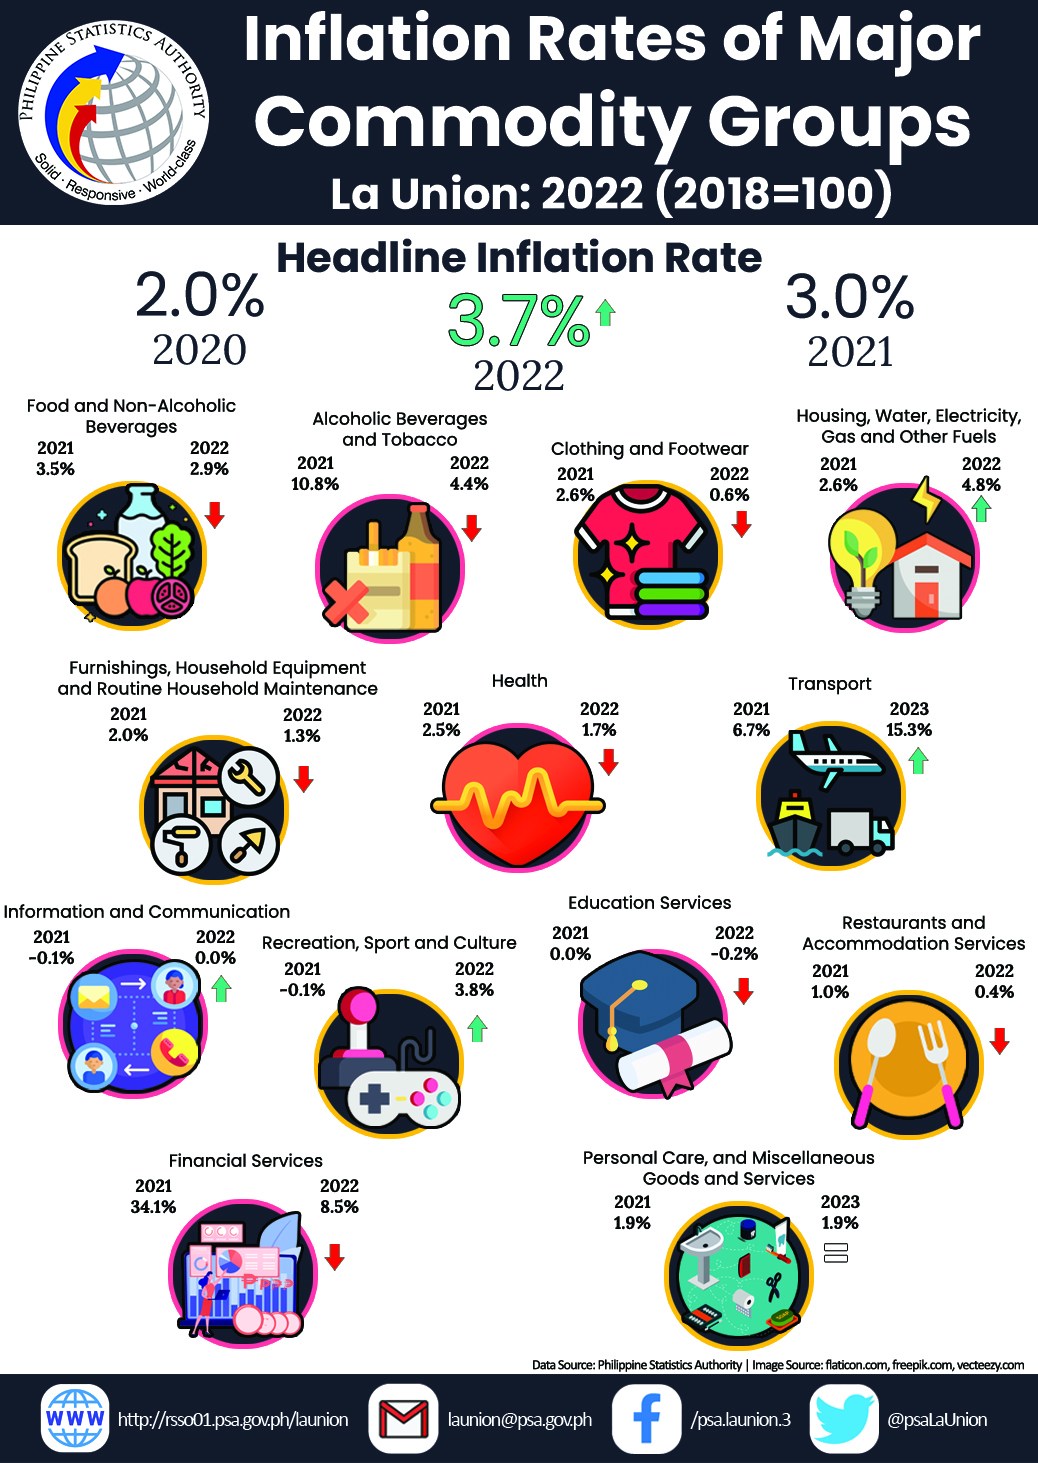 33R01-IG2023-77_Infographics on 2022 Inflation Rate of Major Commodity Groups in La Union